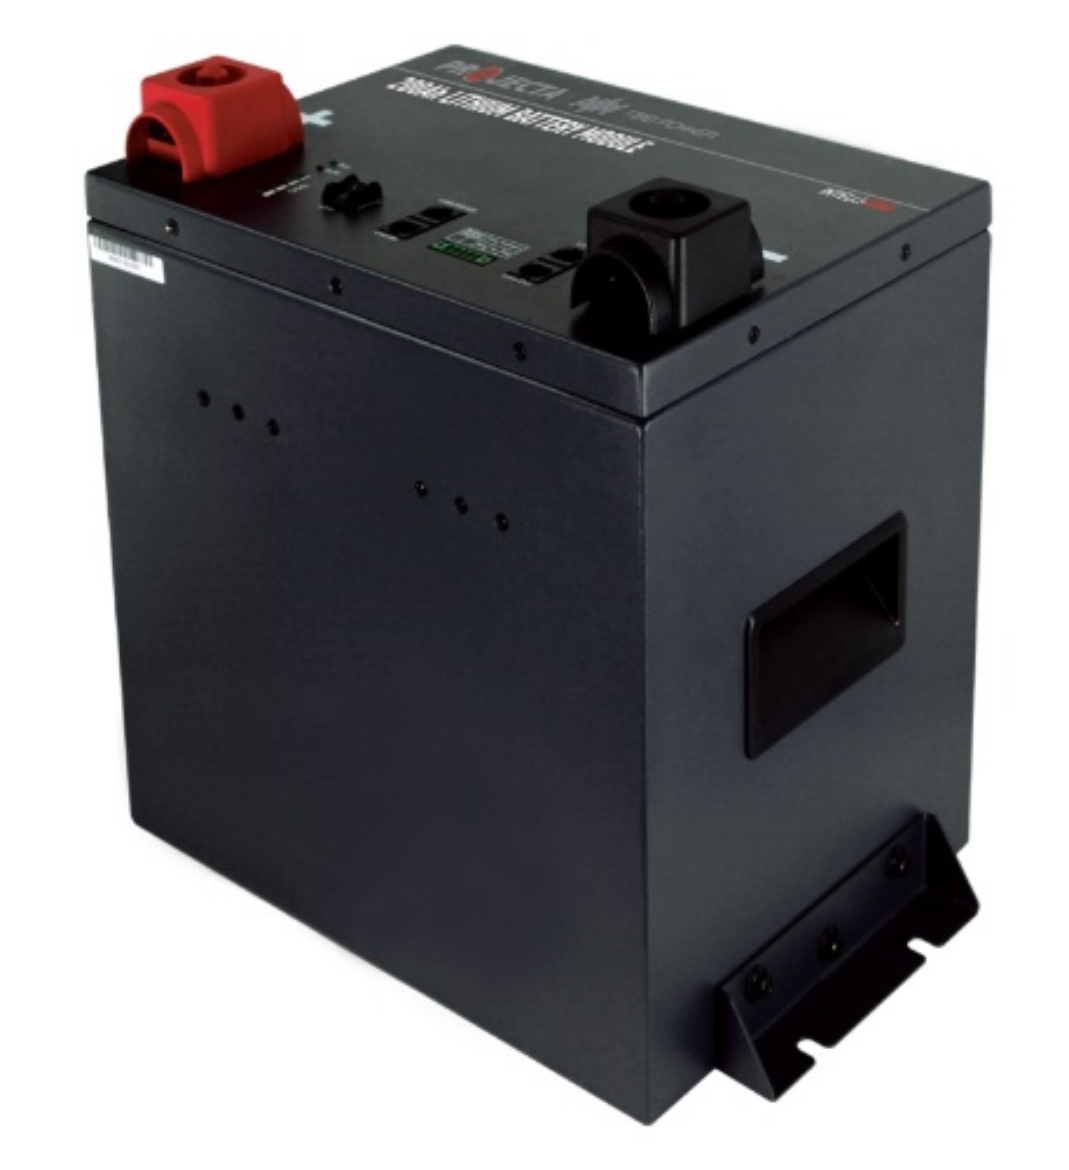 Picture of 12VOLT 200AH / 200A BMS (300A 10MIN) / 2560 WH CAPACITY PROJECTA LIFEPO4 BATTERY - IP20 RATING